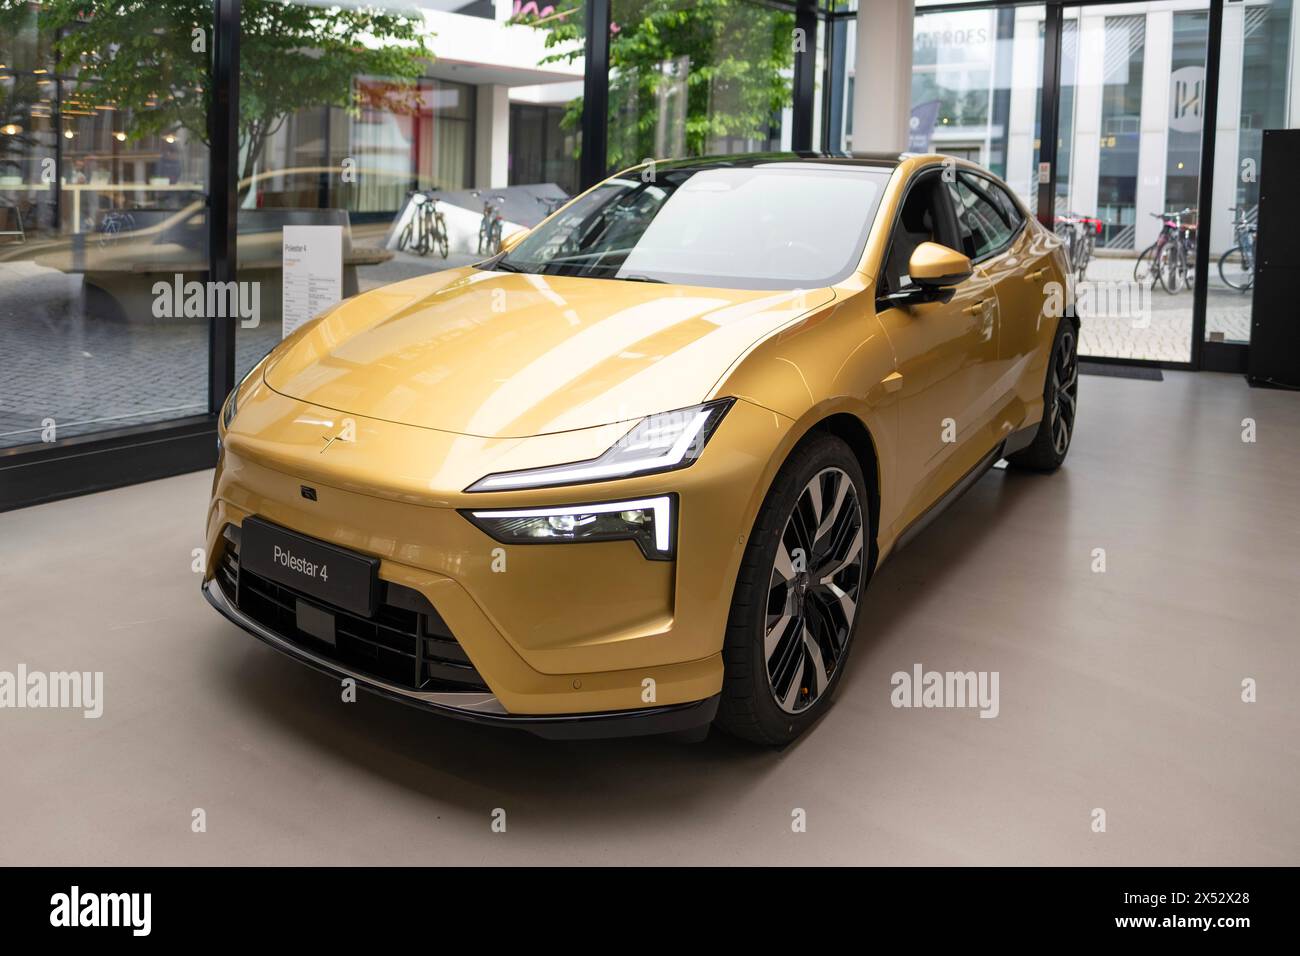 Shiny golden car Polestar 4 upcoming all-electric SUV coupe by Polestar, Volvo subsidiary, long-range, luxurious, eco-friendly vehicle showcased in sh Stock Photo